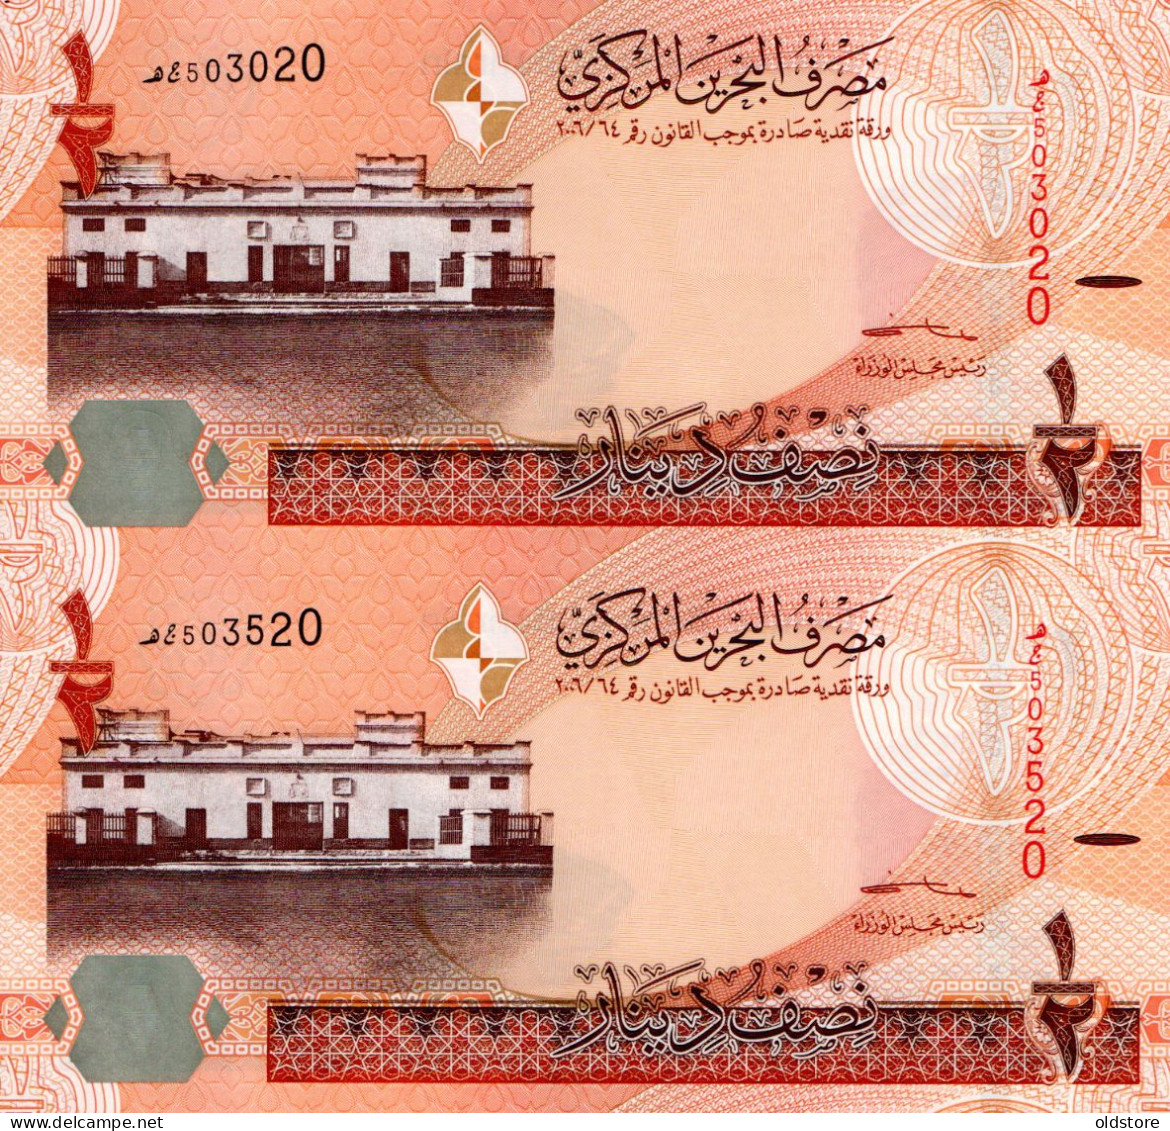 Bahrain - 1/2 Dinar - 2 Pieces Of Uncut Sheet - Issue 2008 New Signature - Similarity In The Last Two Numbers UNC Rare - Bahrein